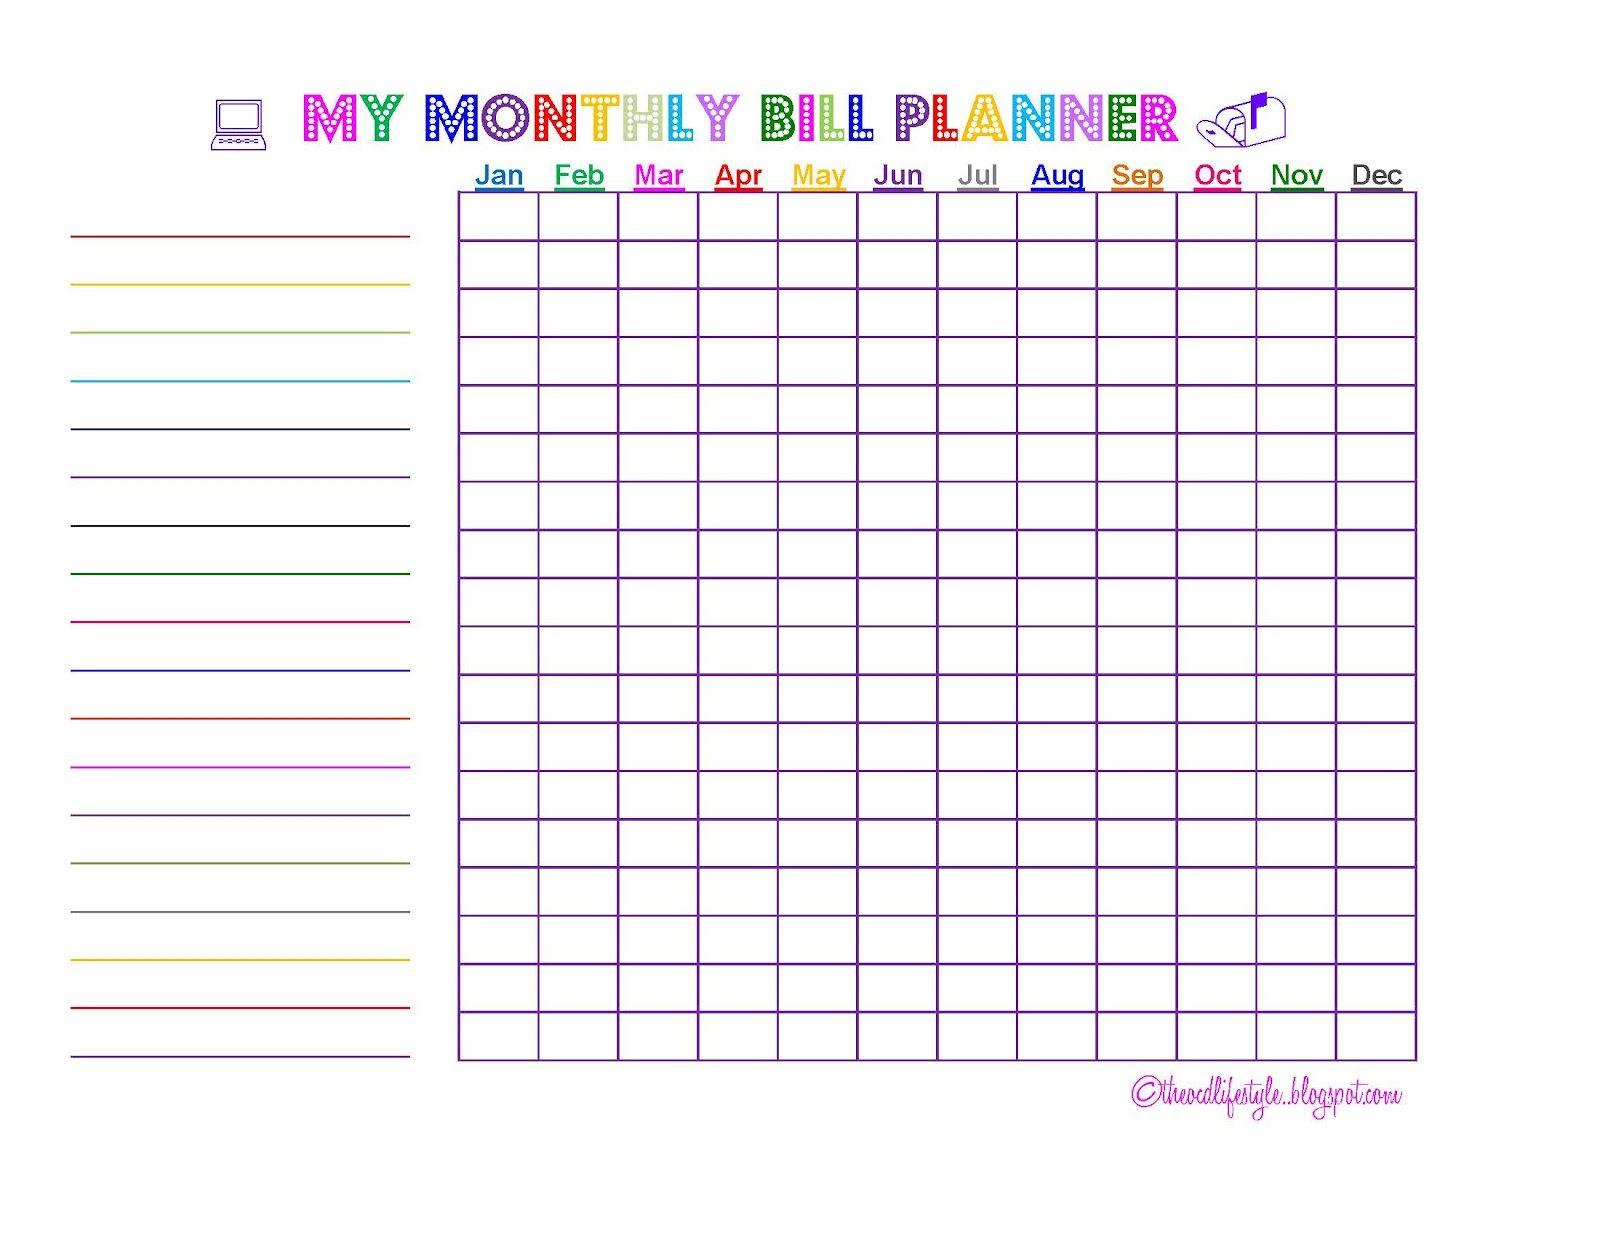 Free Monthly Bill Paying Chart Printable | Bill Planner regarding Printable Monthly Bill Chart